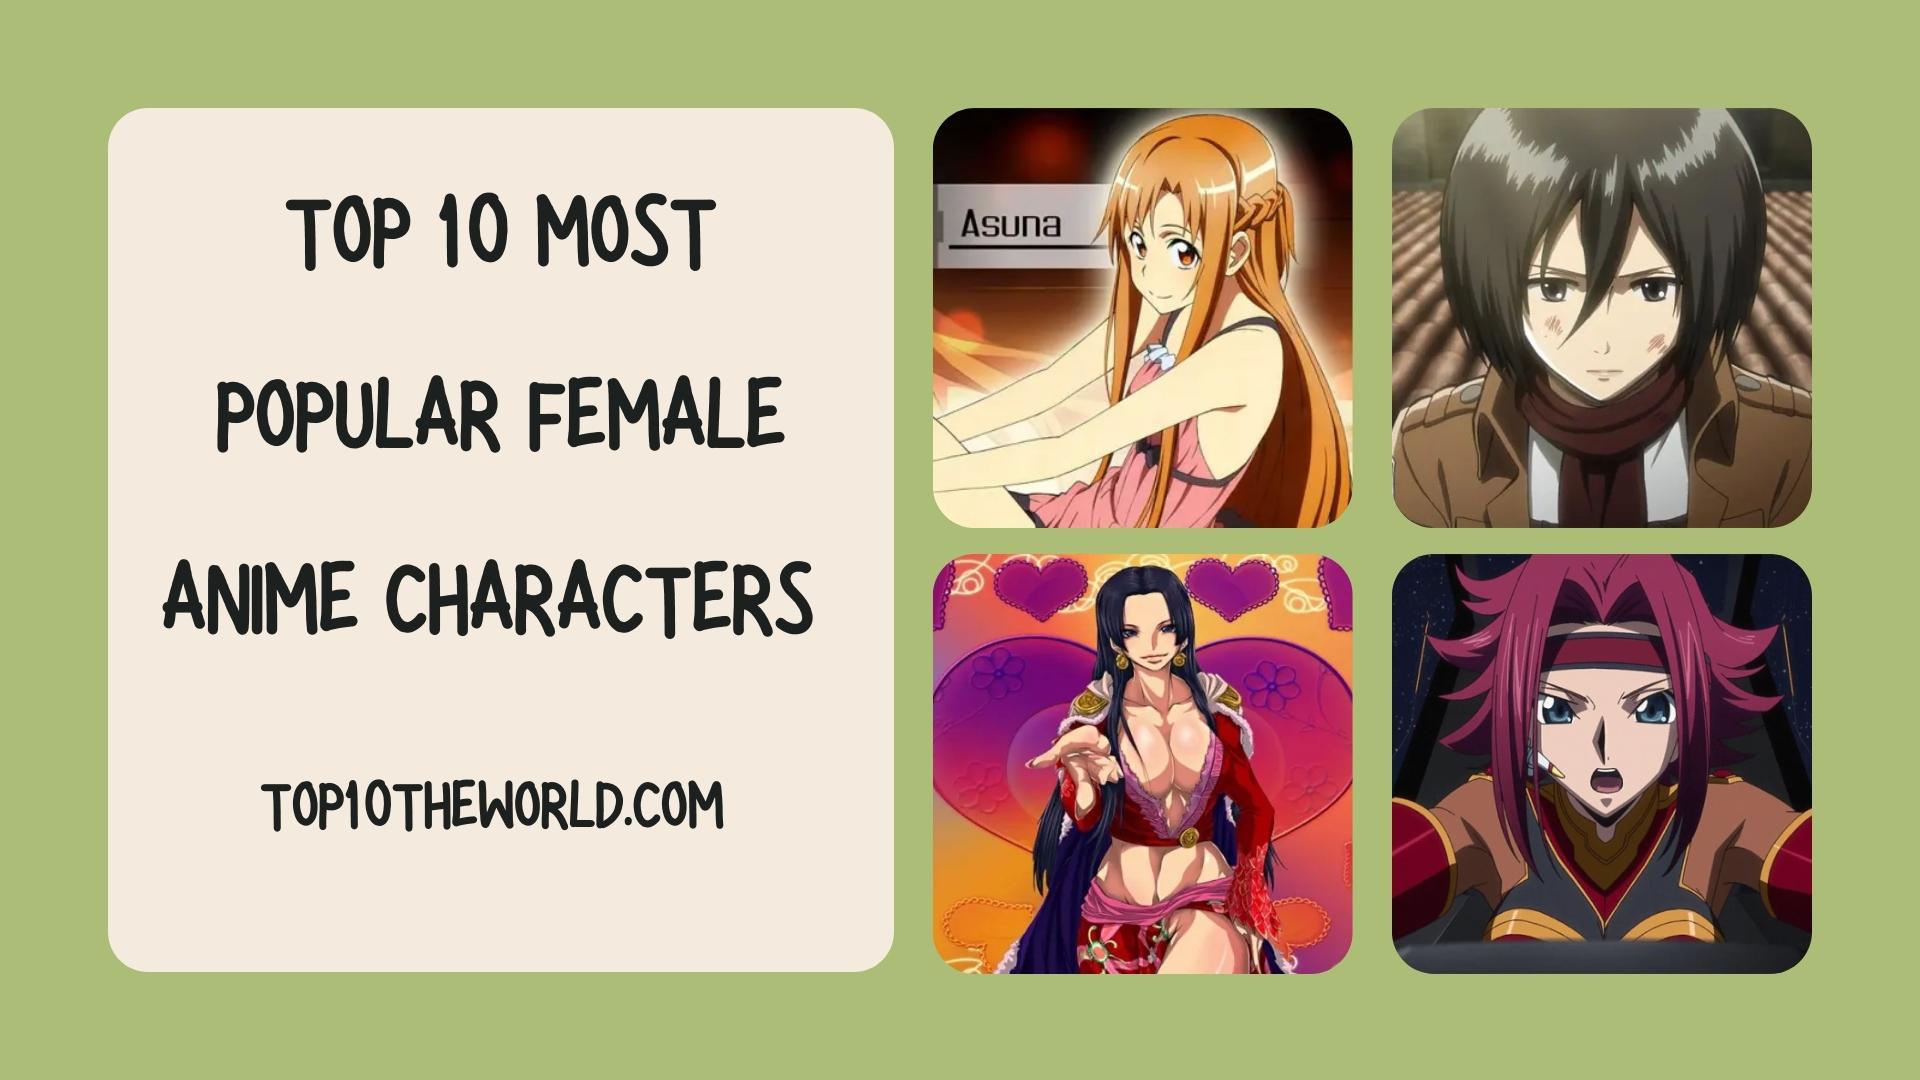 Top 10 Most Popular Female Anime Characters